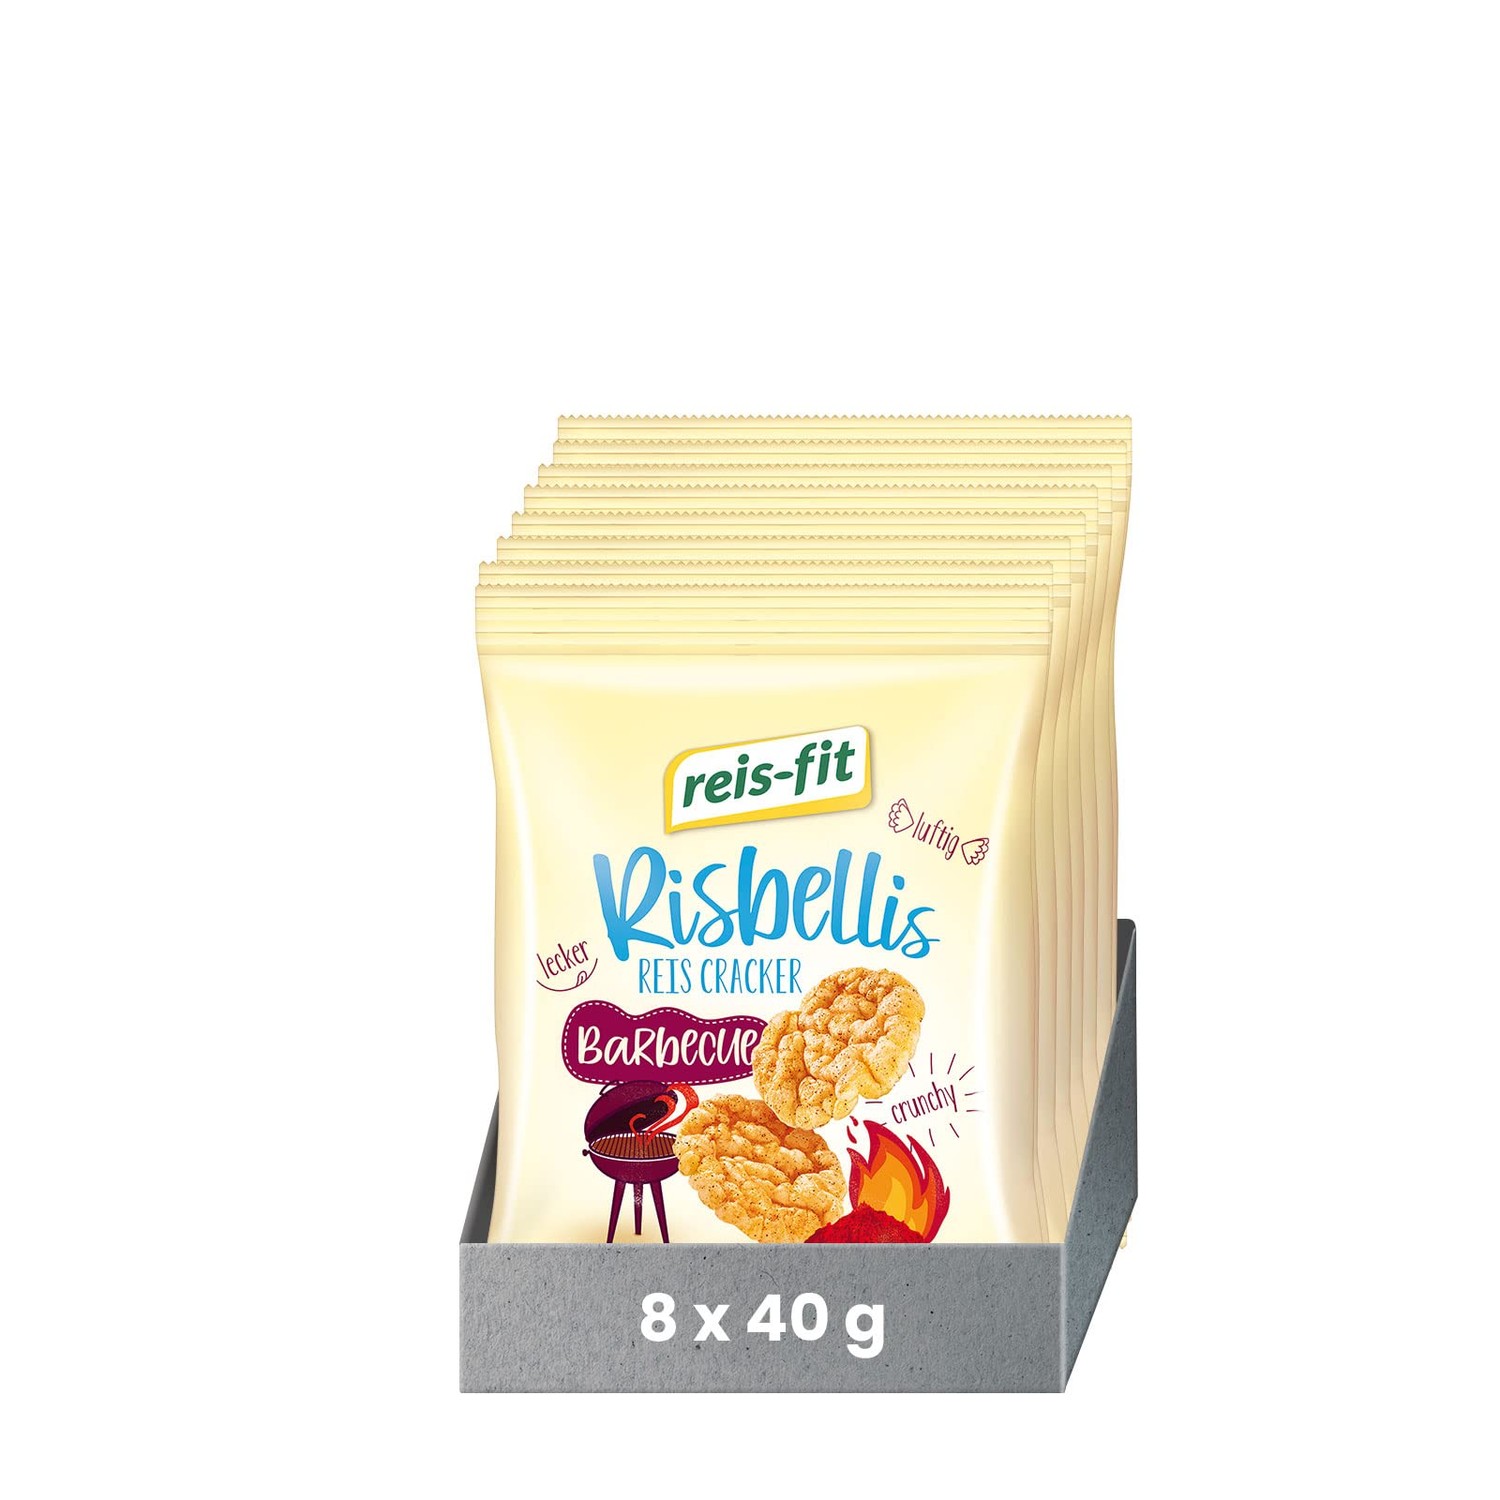 reis-fit Risbellis 8 Vegan, x Rice Go the for Snack Barbecue 40 g, Gluten-Free, on Crispy, Waffle